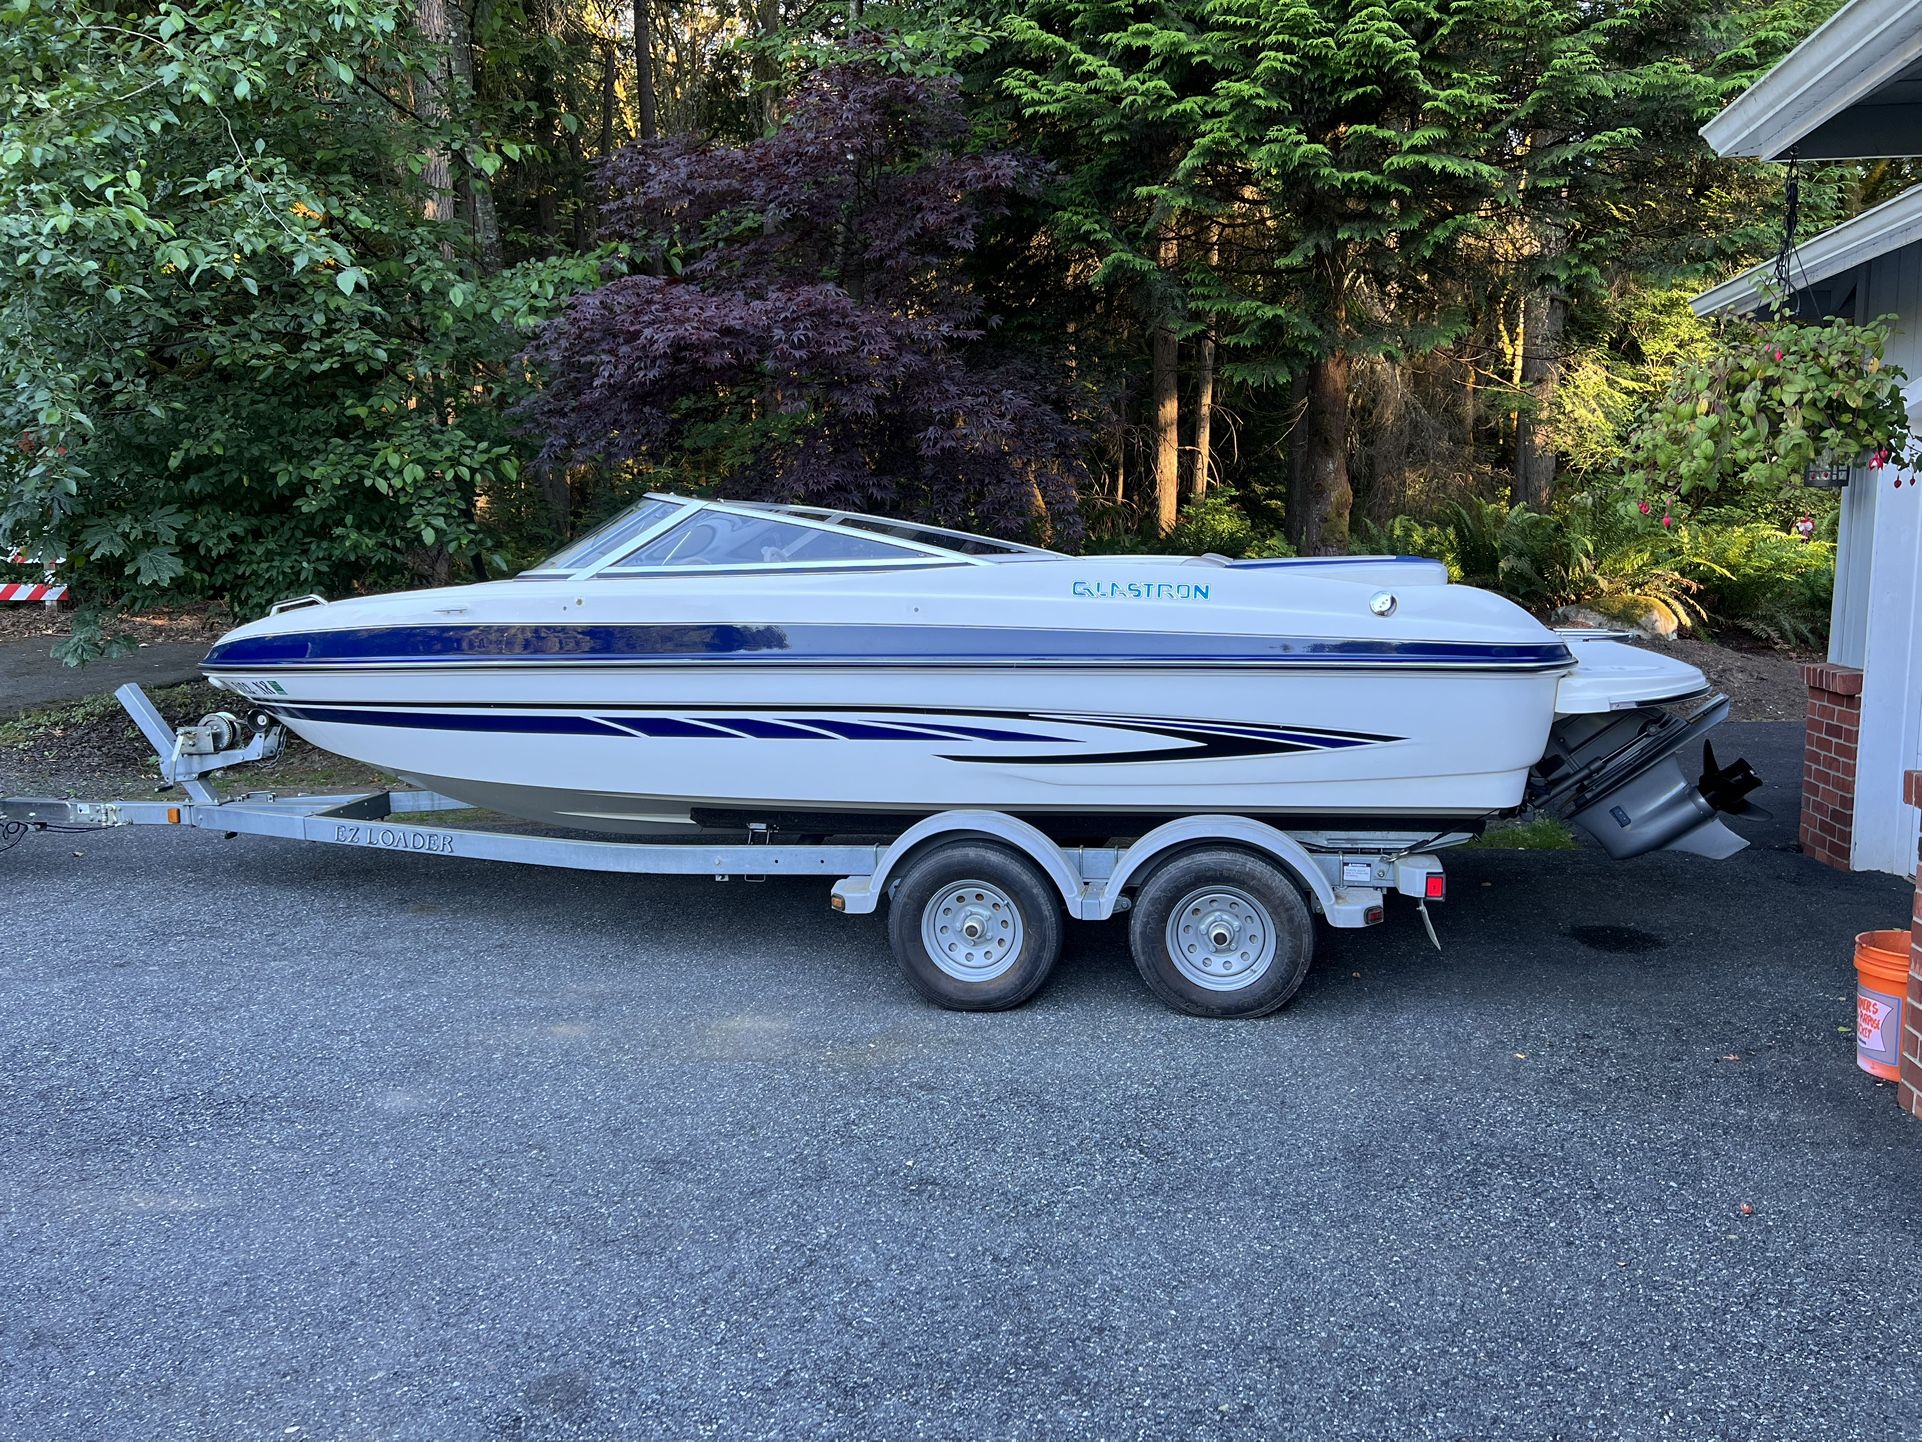 2007 Glaston Ski And Or Wake  Boat In Great Shape  Low Hours 